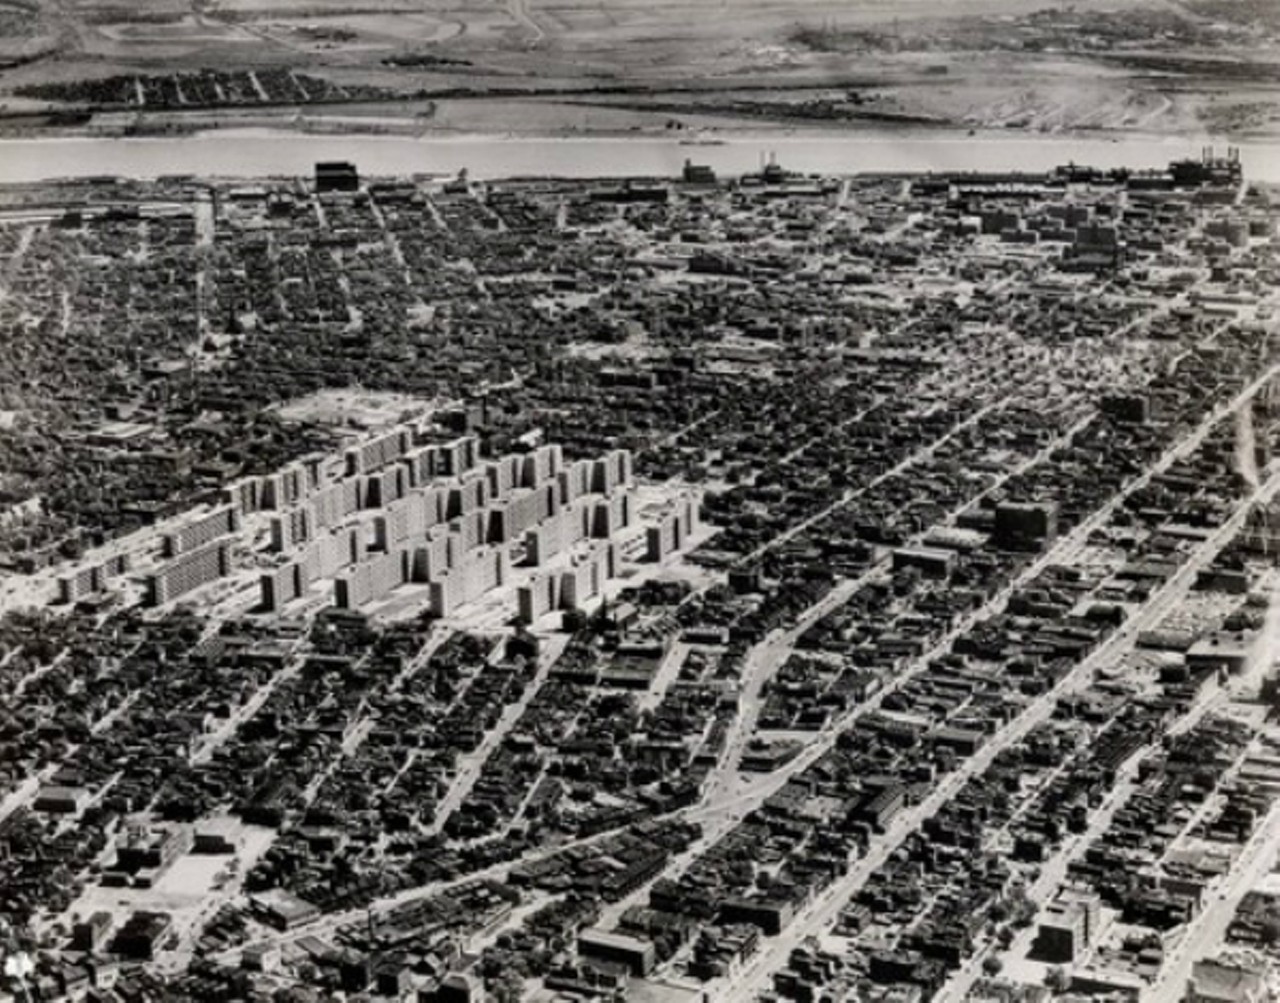 "We had a famous public housing project turned dystopian nightmare."
The former site of Pruitt Igoe, 2300 Cass Ave.
"Did you watch The Pruitt Igoe Myth on Netflix? There used to be 33 different public housing towers here, but the government neglected them and it turned into a nightmare. They ended up blowing them up on live TV. This is where that was."
Photo courtesy of pruittigoenow.org